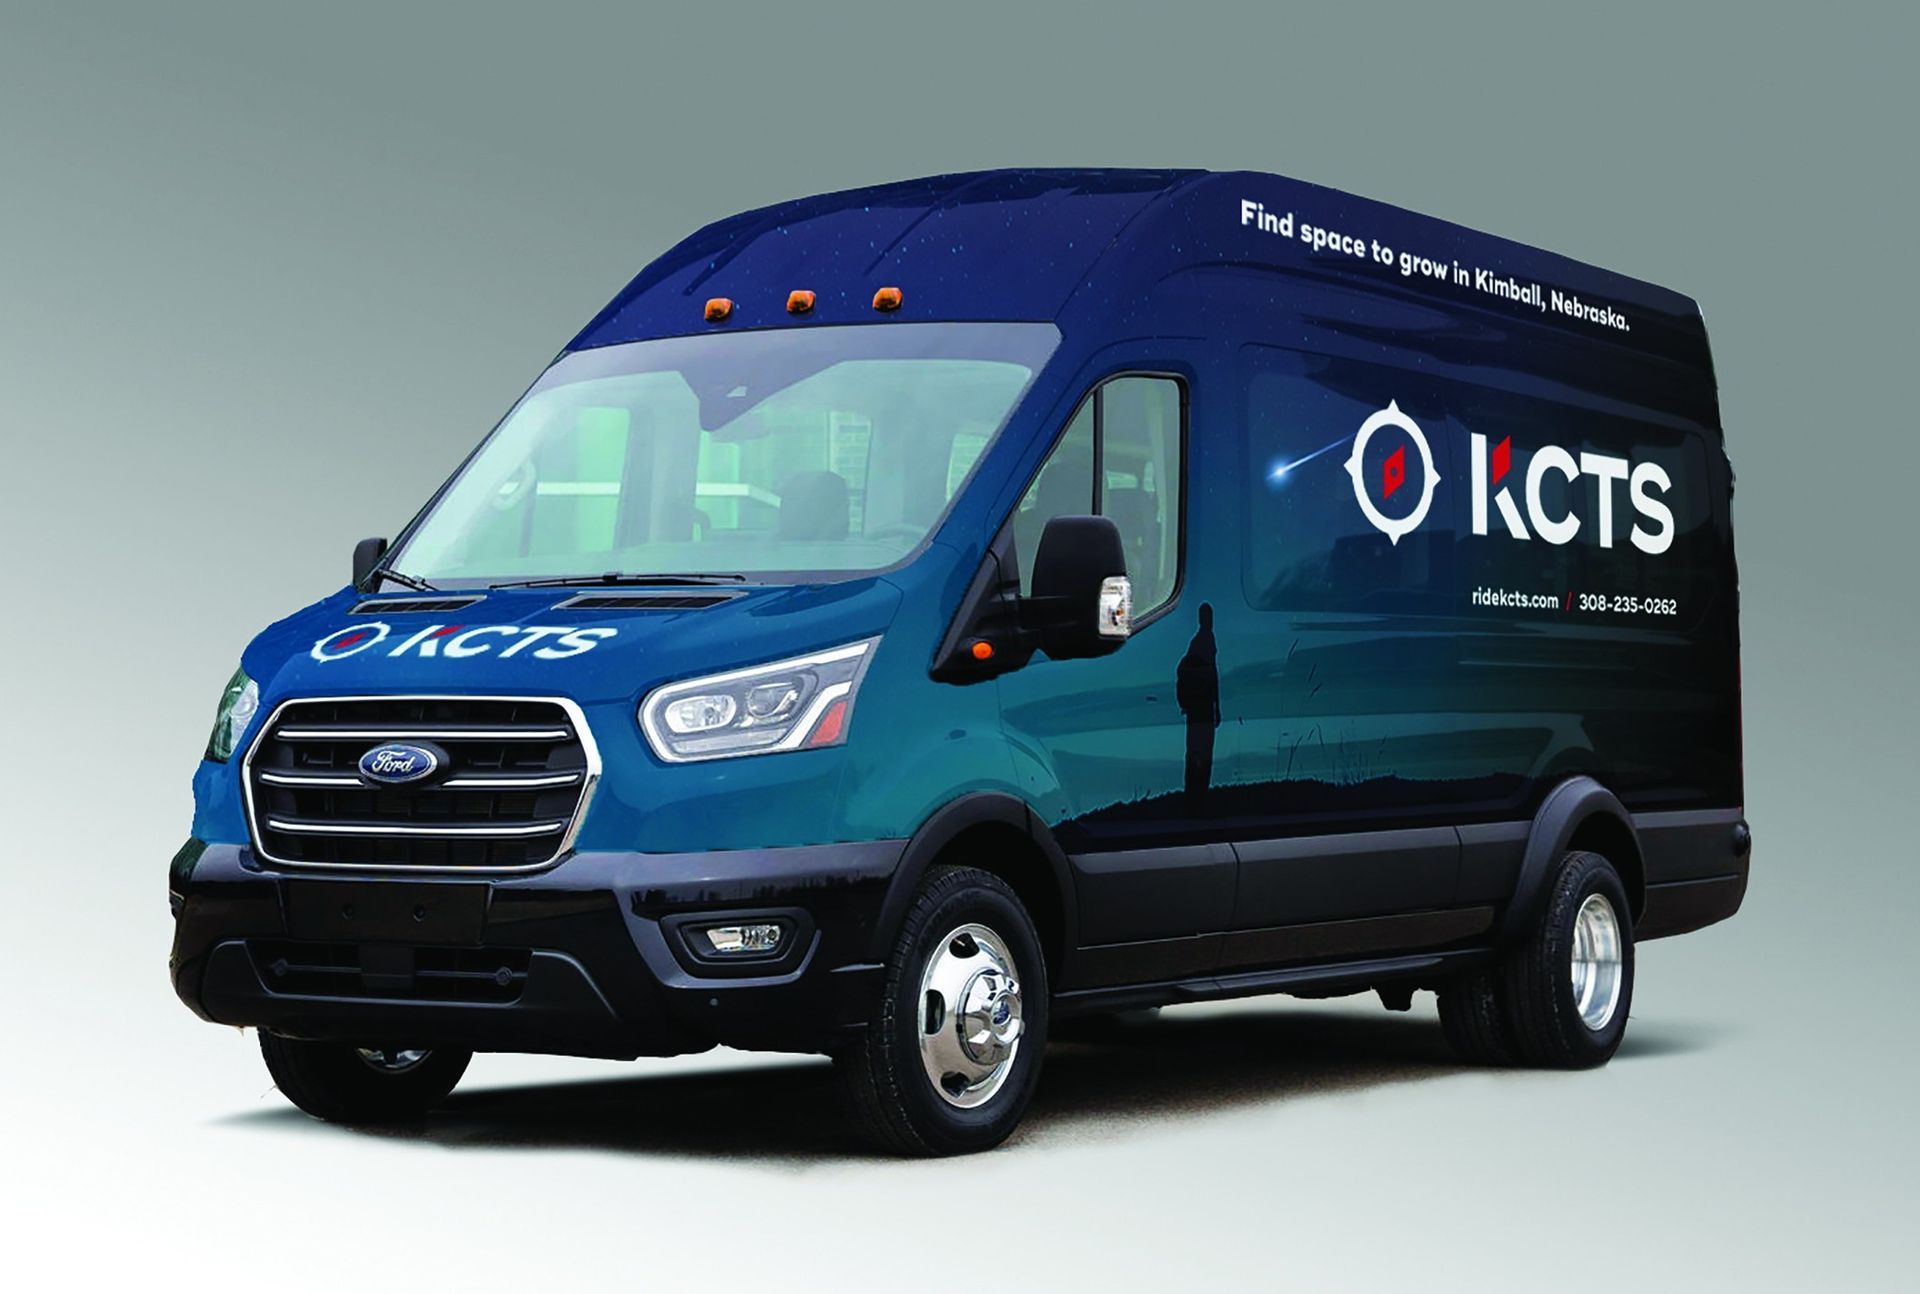 photo of a KCTS vehicle